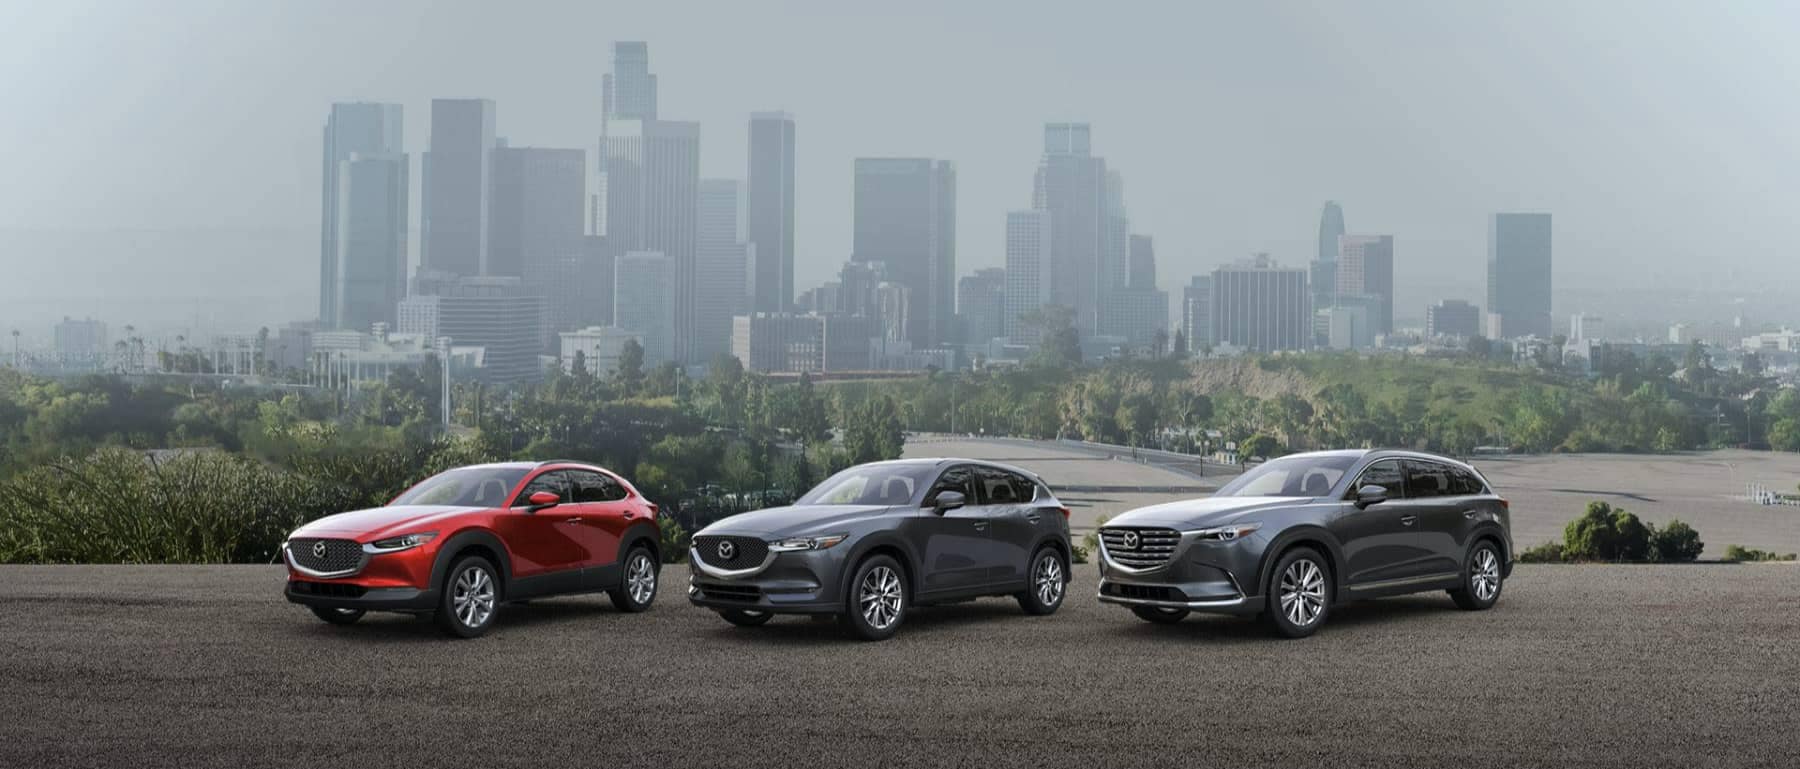 Headquarter mazda in clermont is one of the top mazda dealerships in florida with a large selection of new & used mazdas. Welcome To Mazda Of Fort Walton Beach In Florida